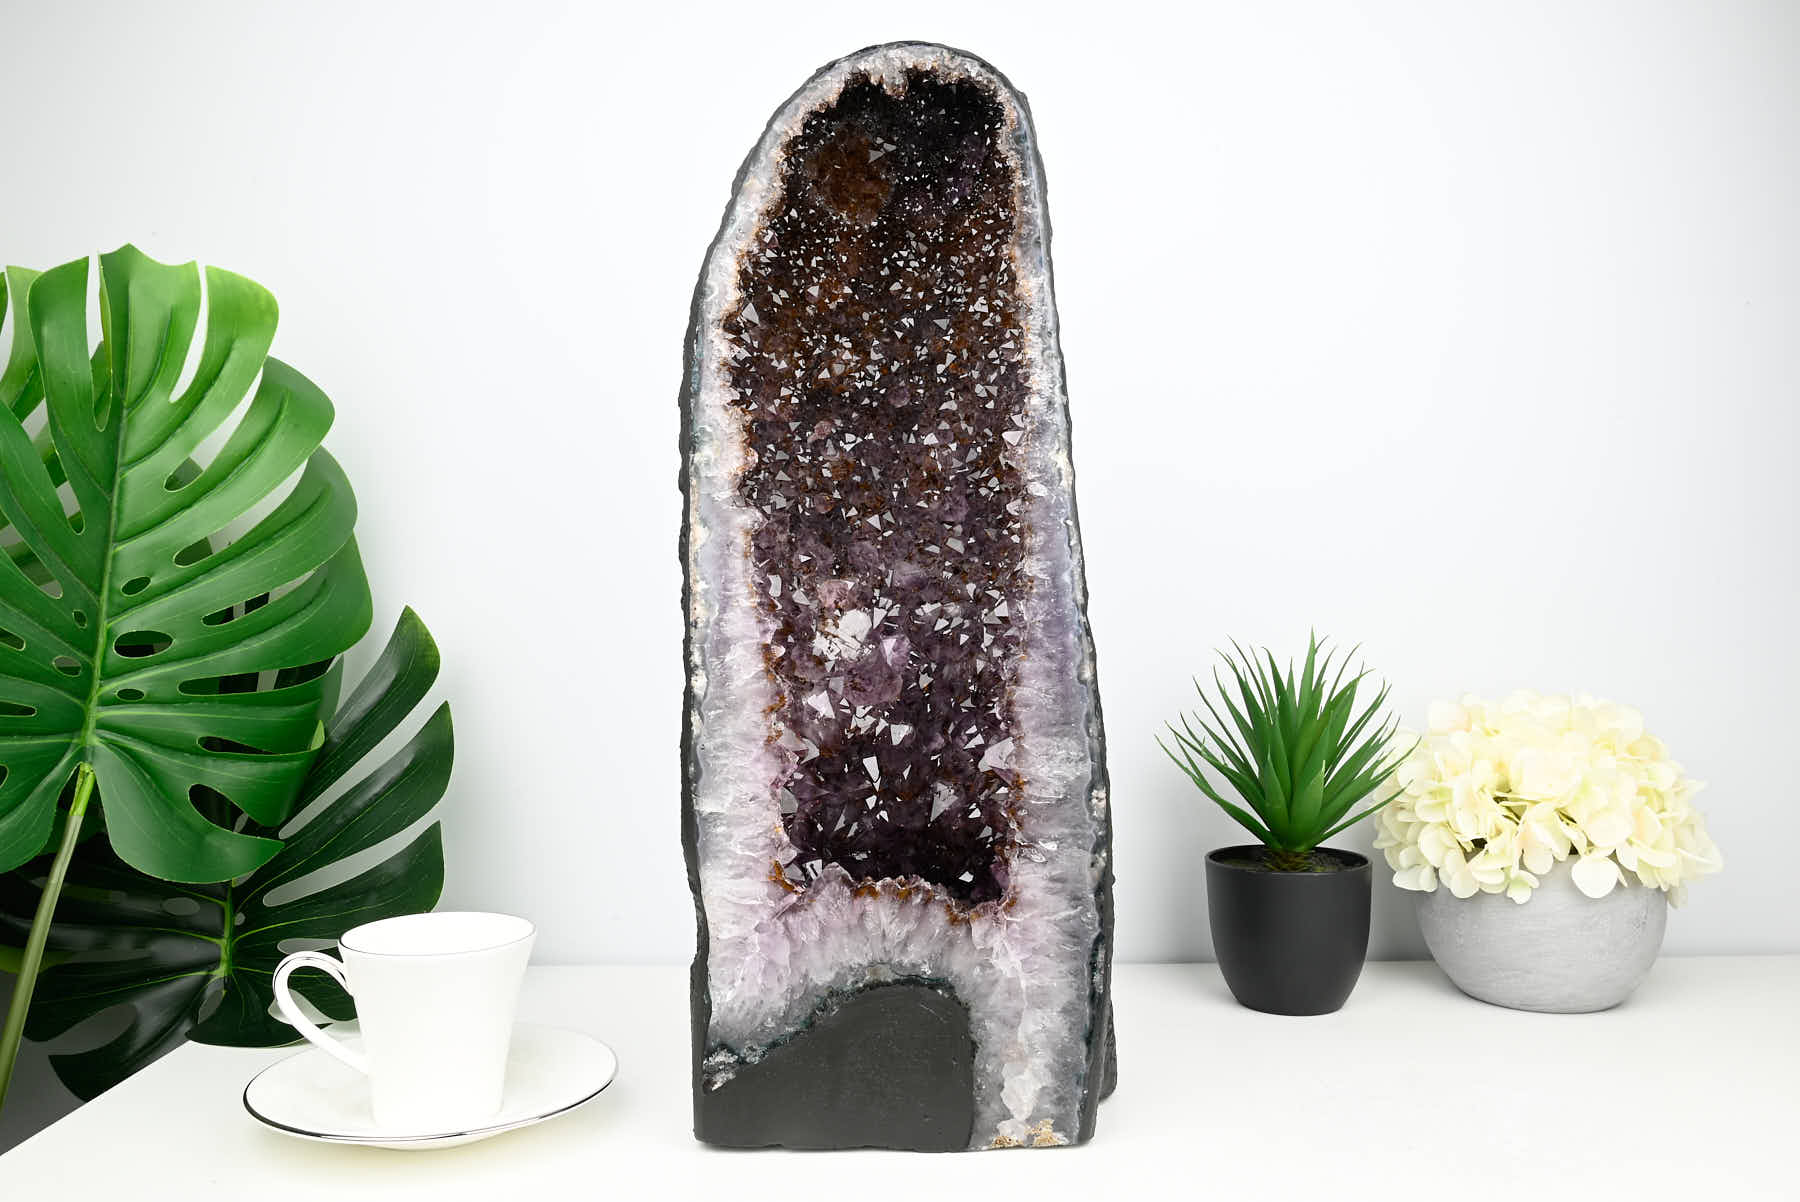 Extra Quality Amethyst Cathedral - 15.6kg, 50cm tall - #CAAMET-10048